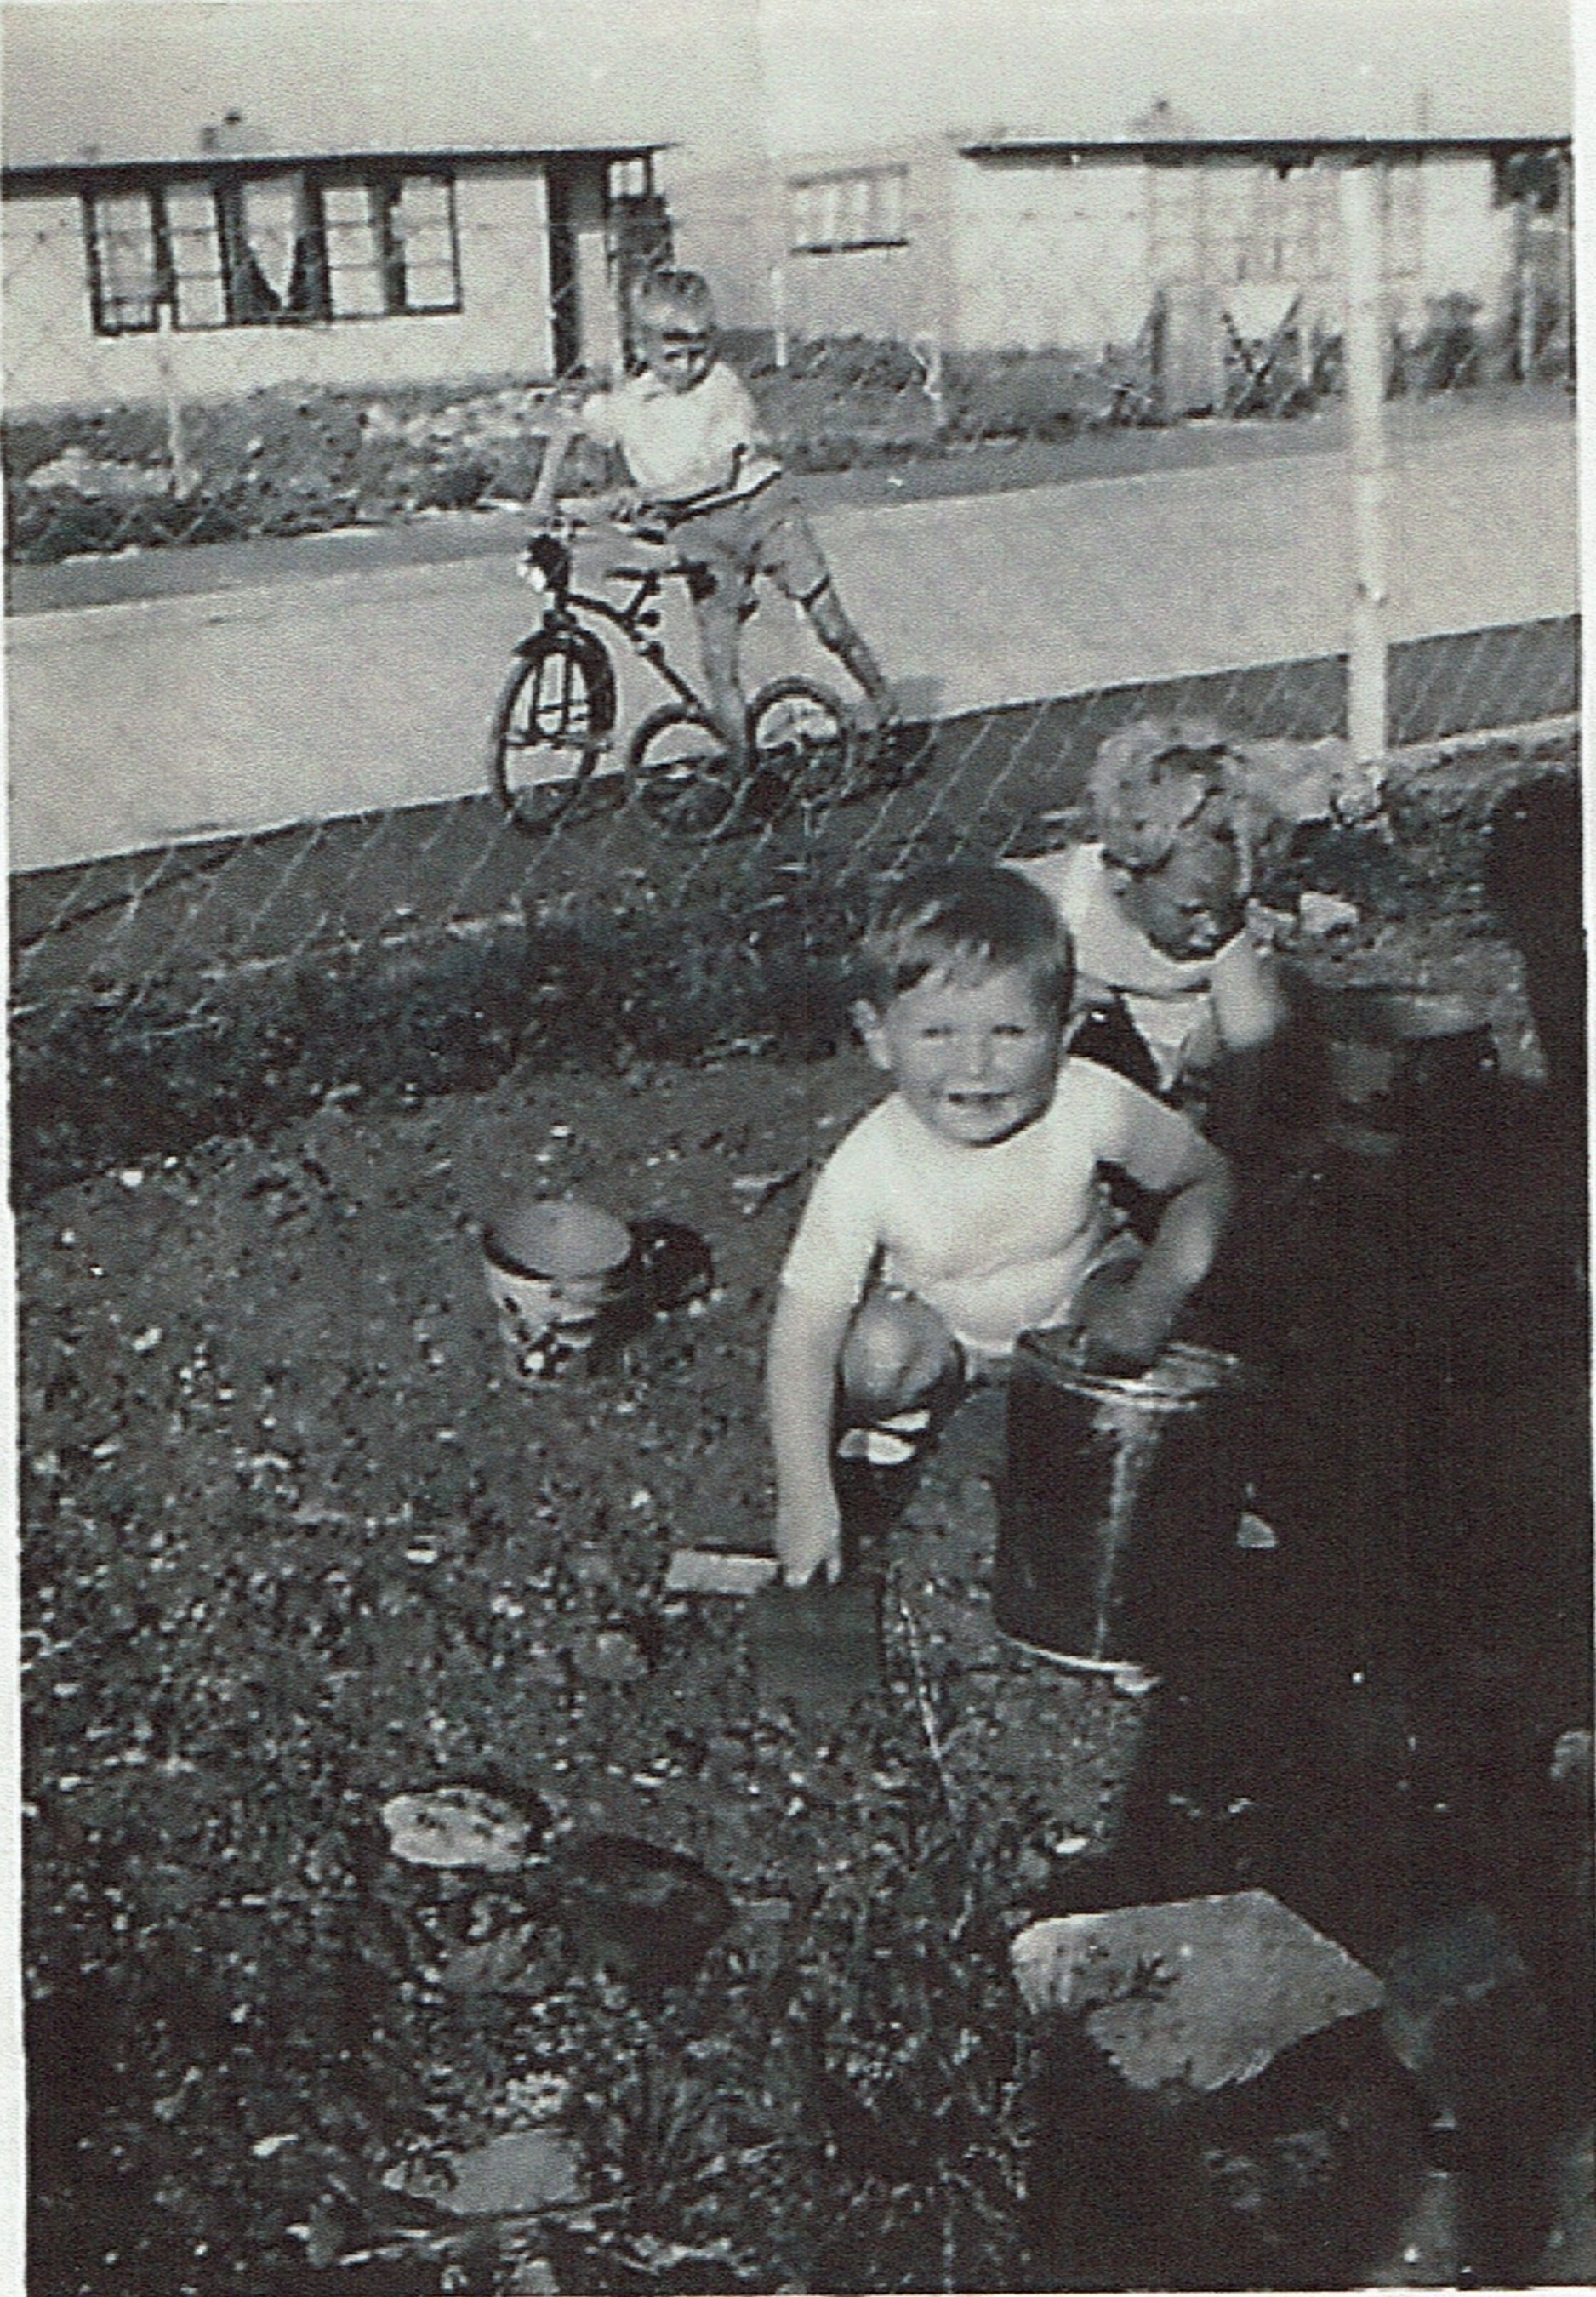 Two small children playing in the prefab garden, one in background on bike. Clement Road, Willesden